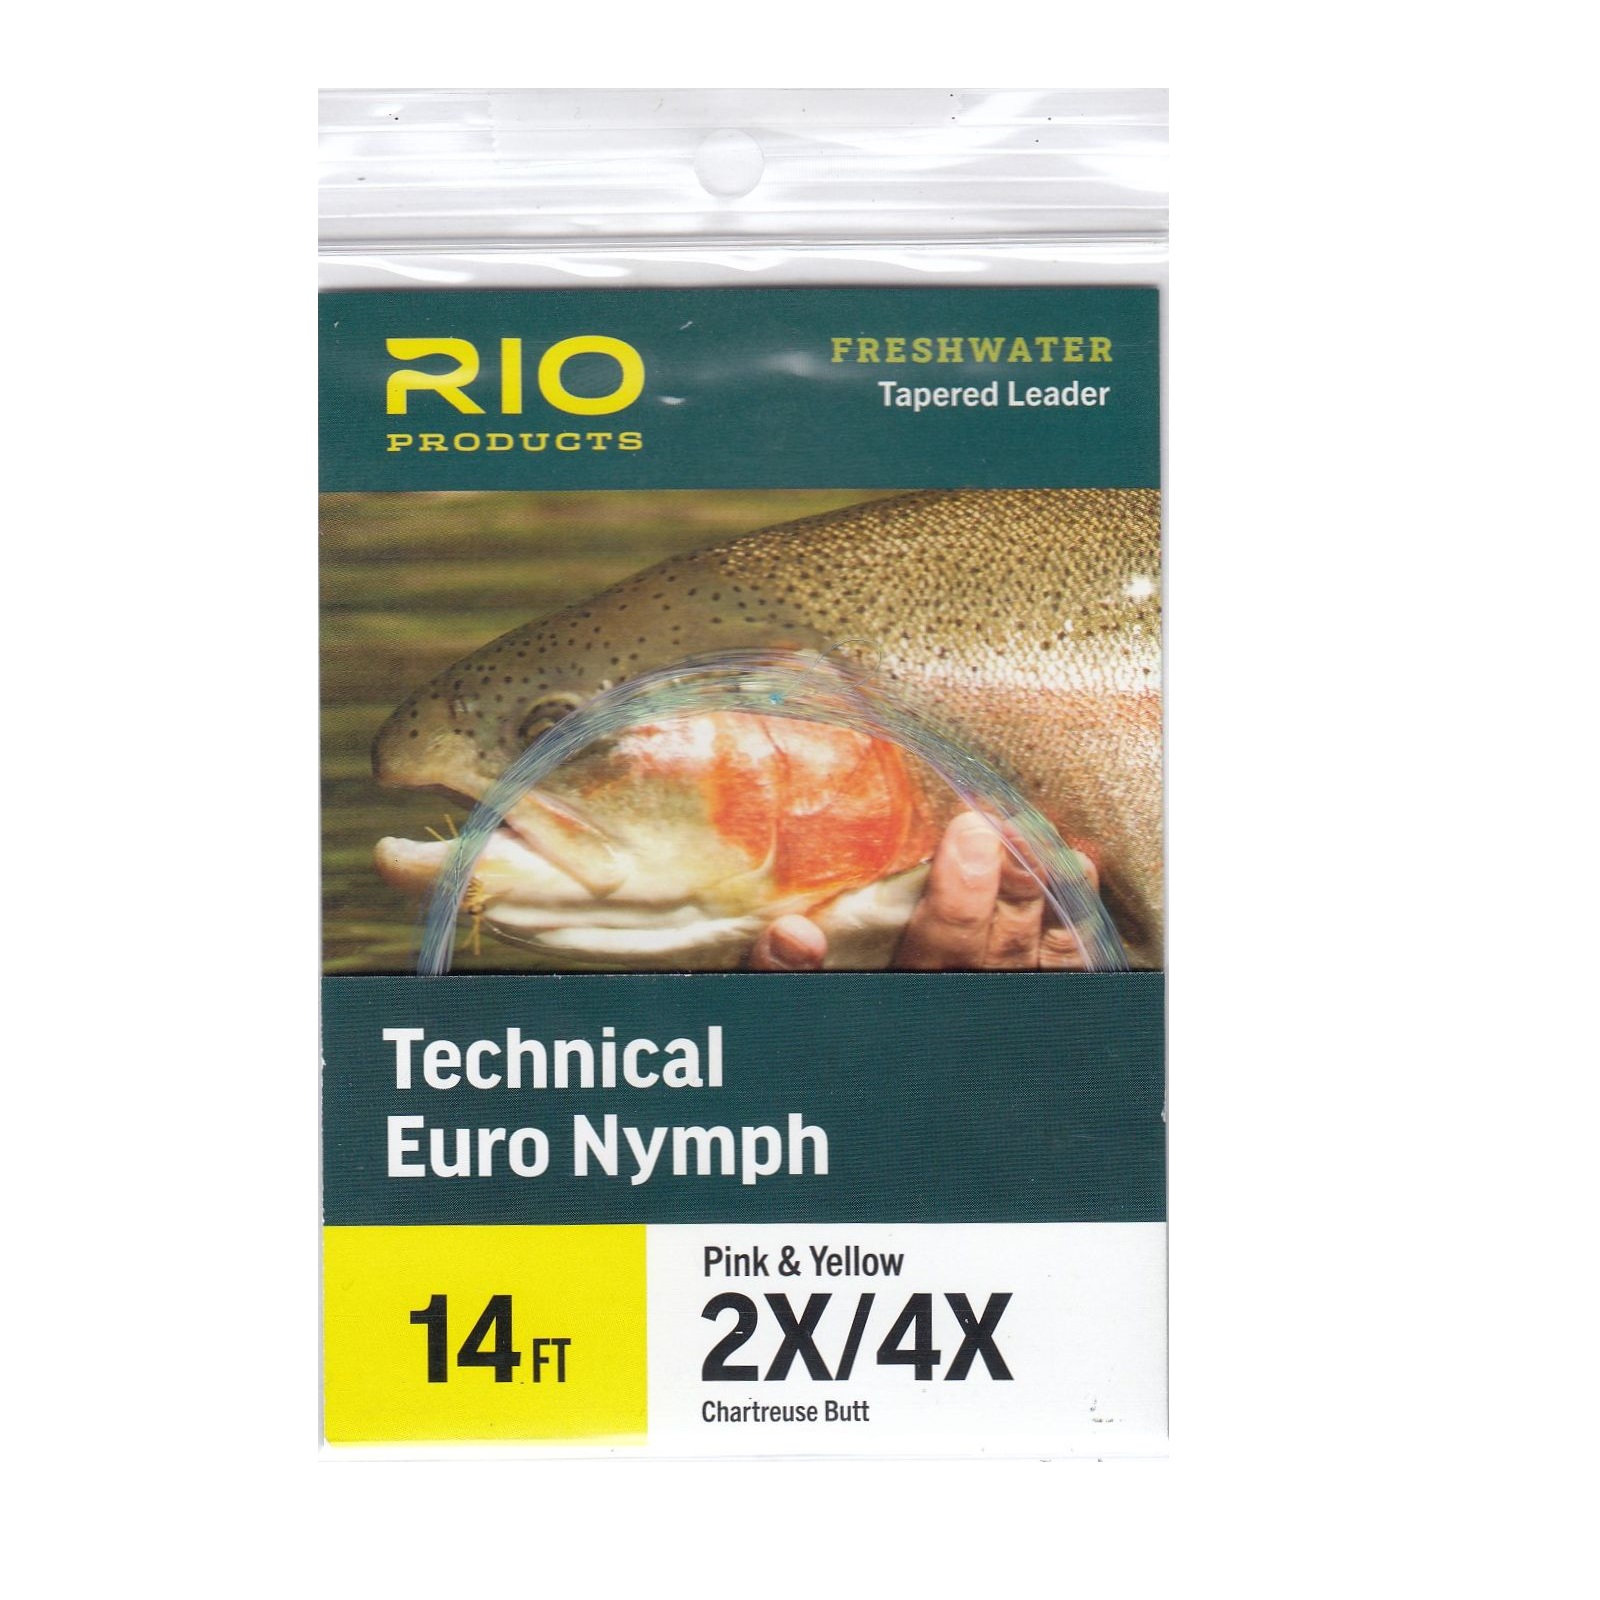 Technical Euro Nymph Leader (14 ft - 2X/4X)